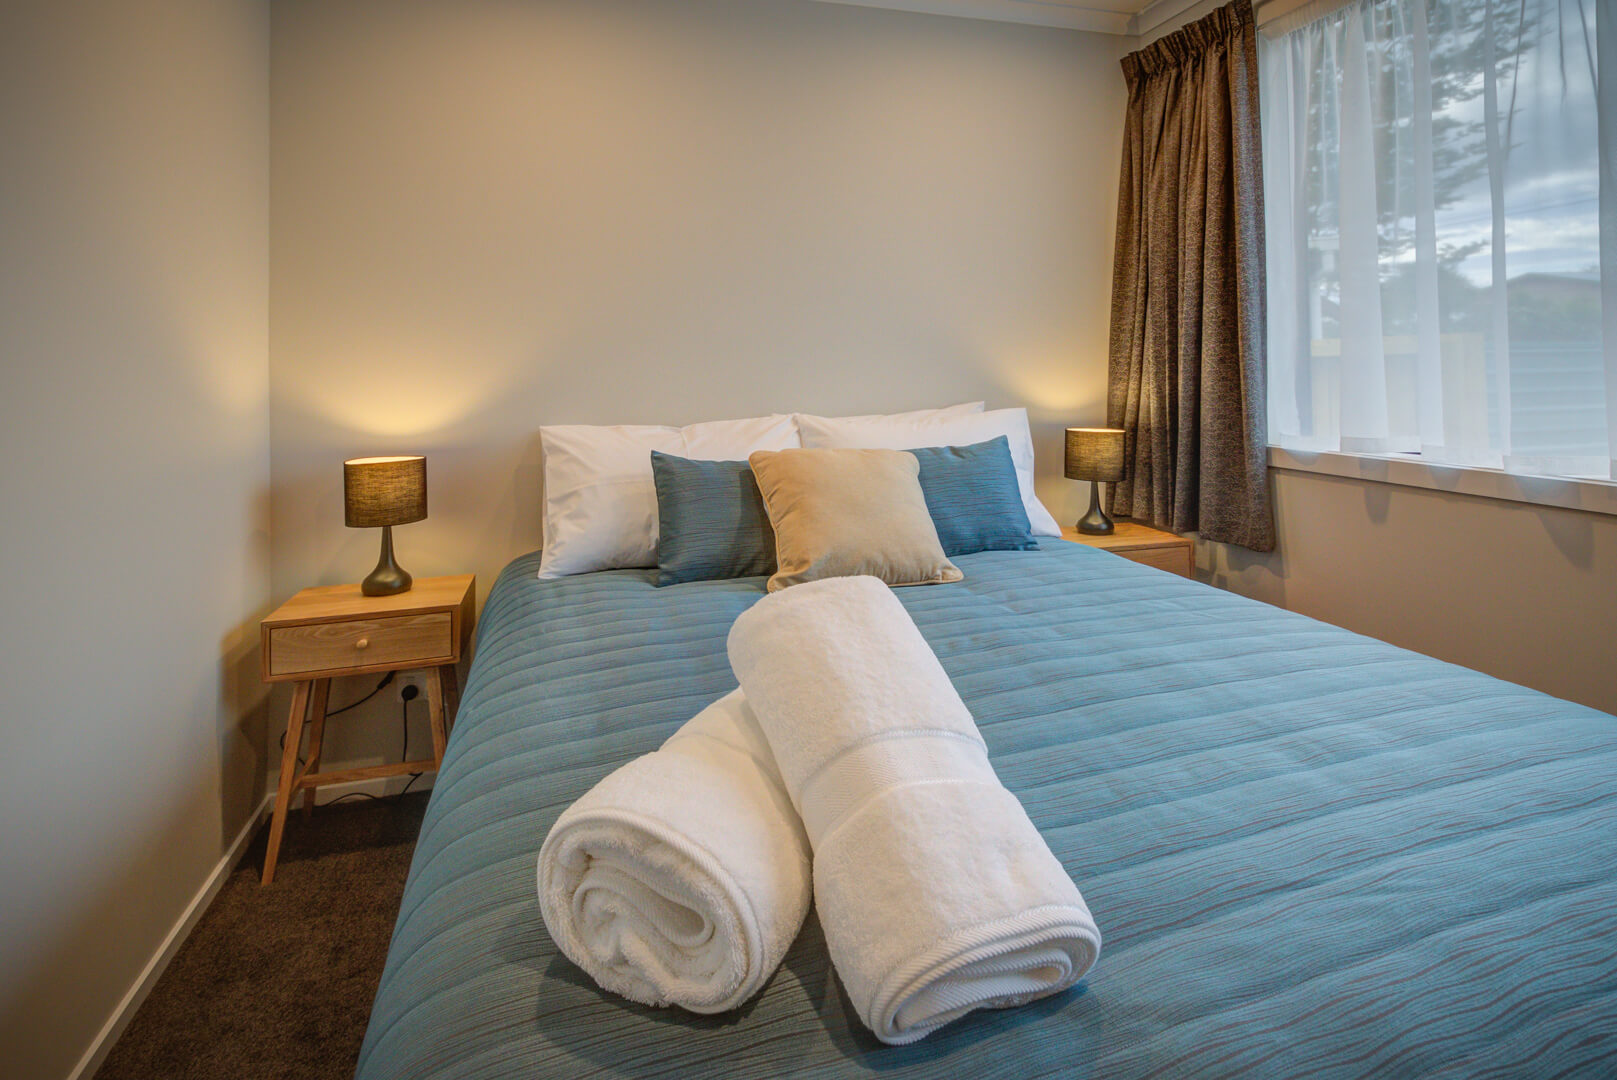 Queen sized bed with blue bedspread in one-bedroom unit at Dusky Motels, Te Anau